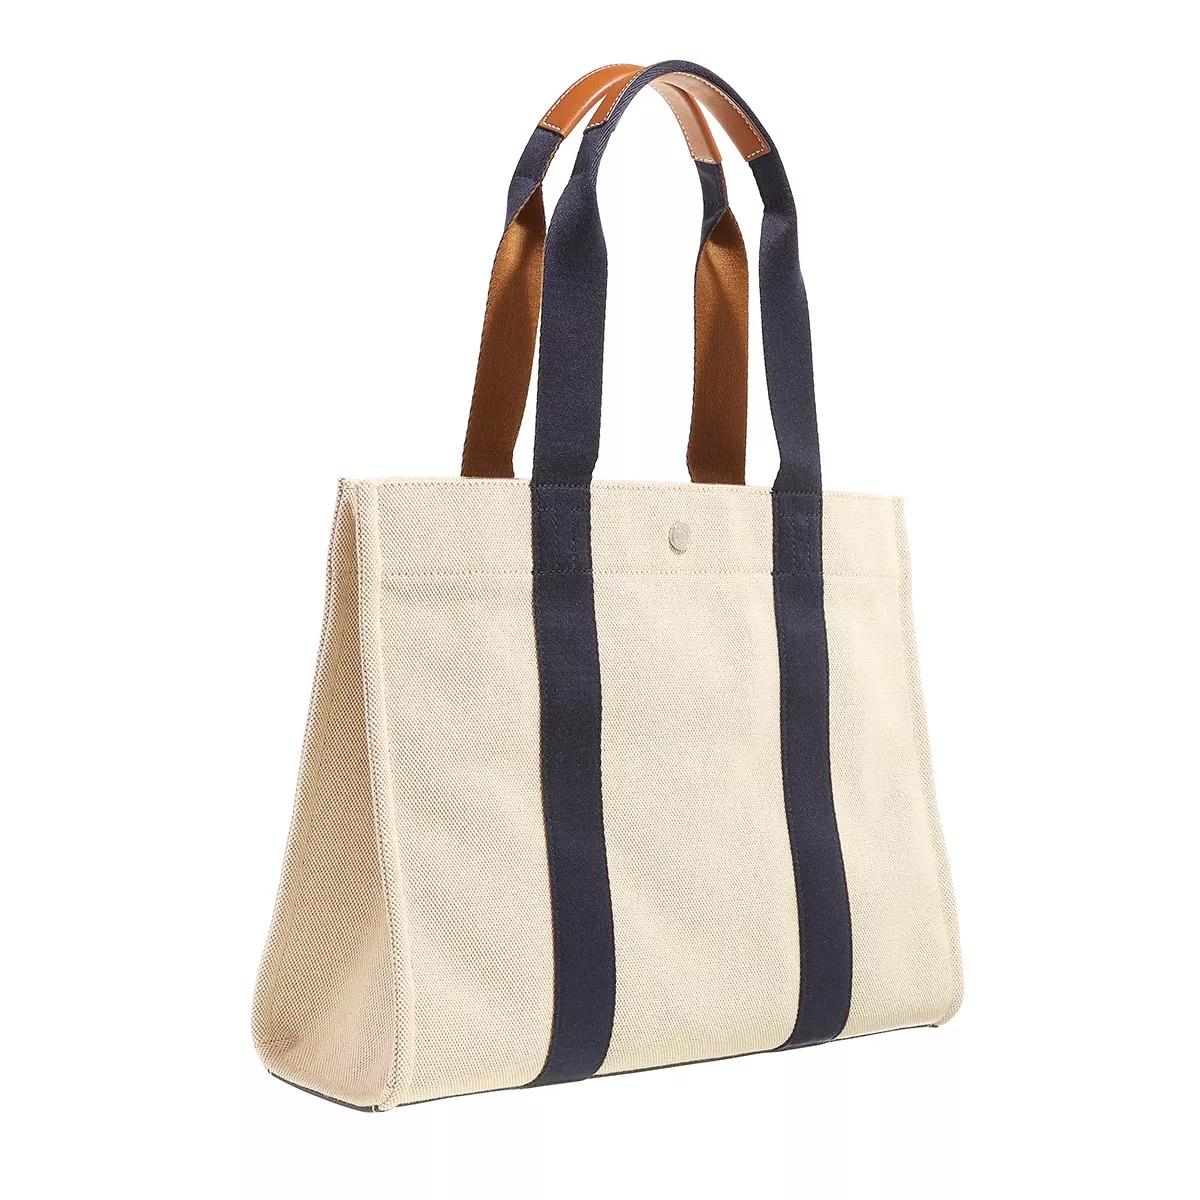 Tory Burch Totes - Tory Tote in beige